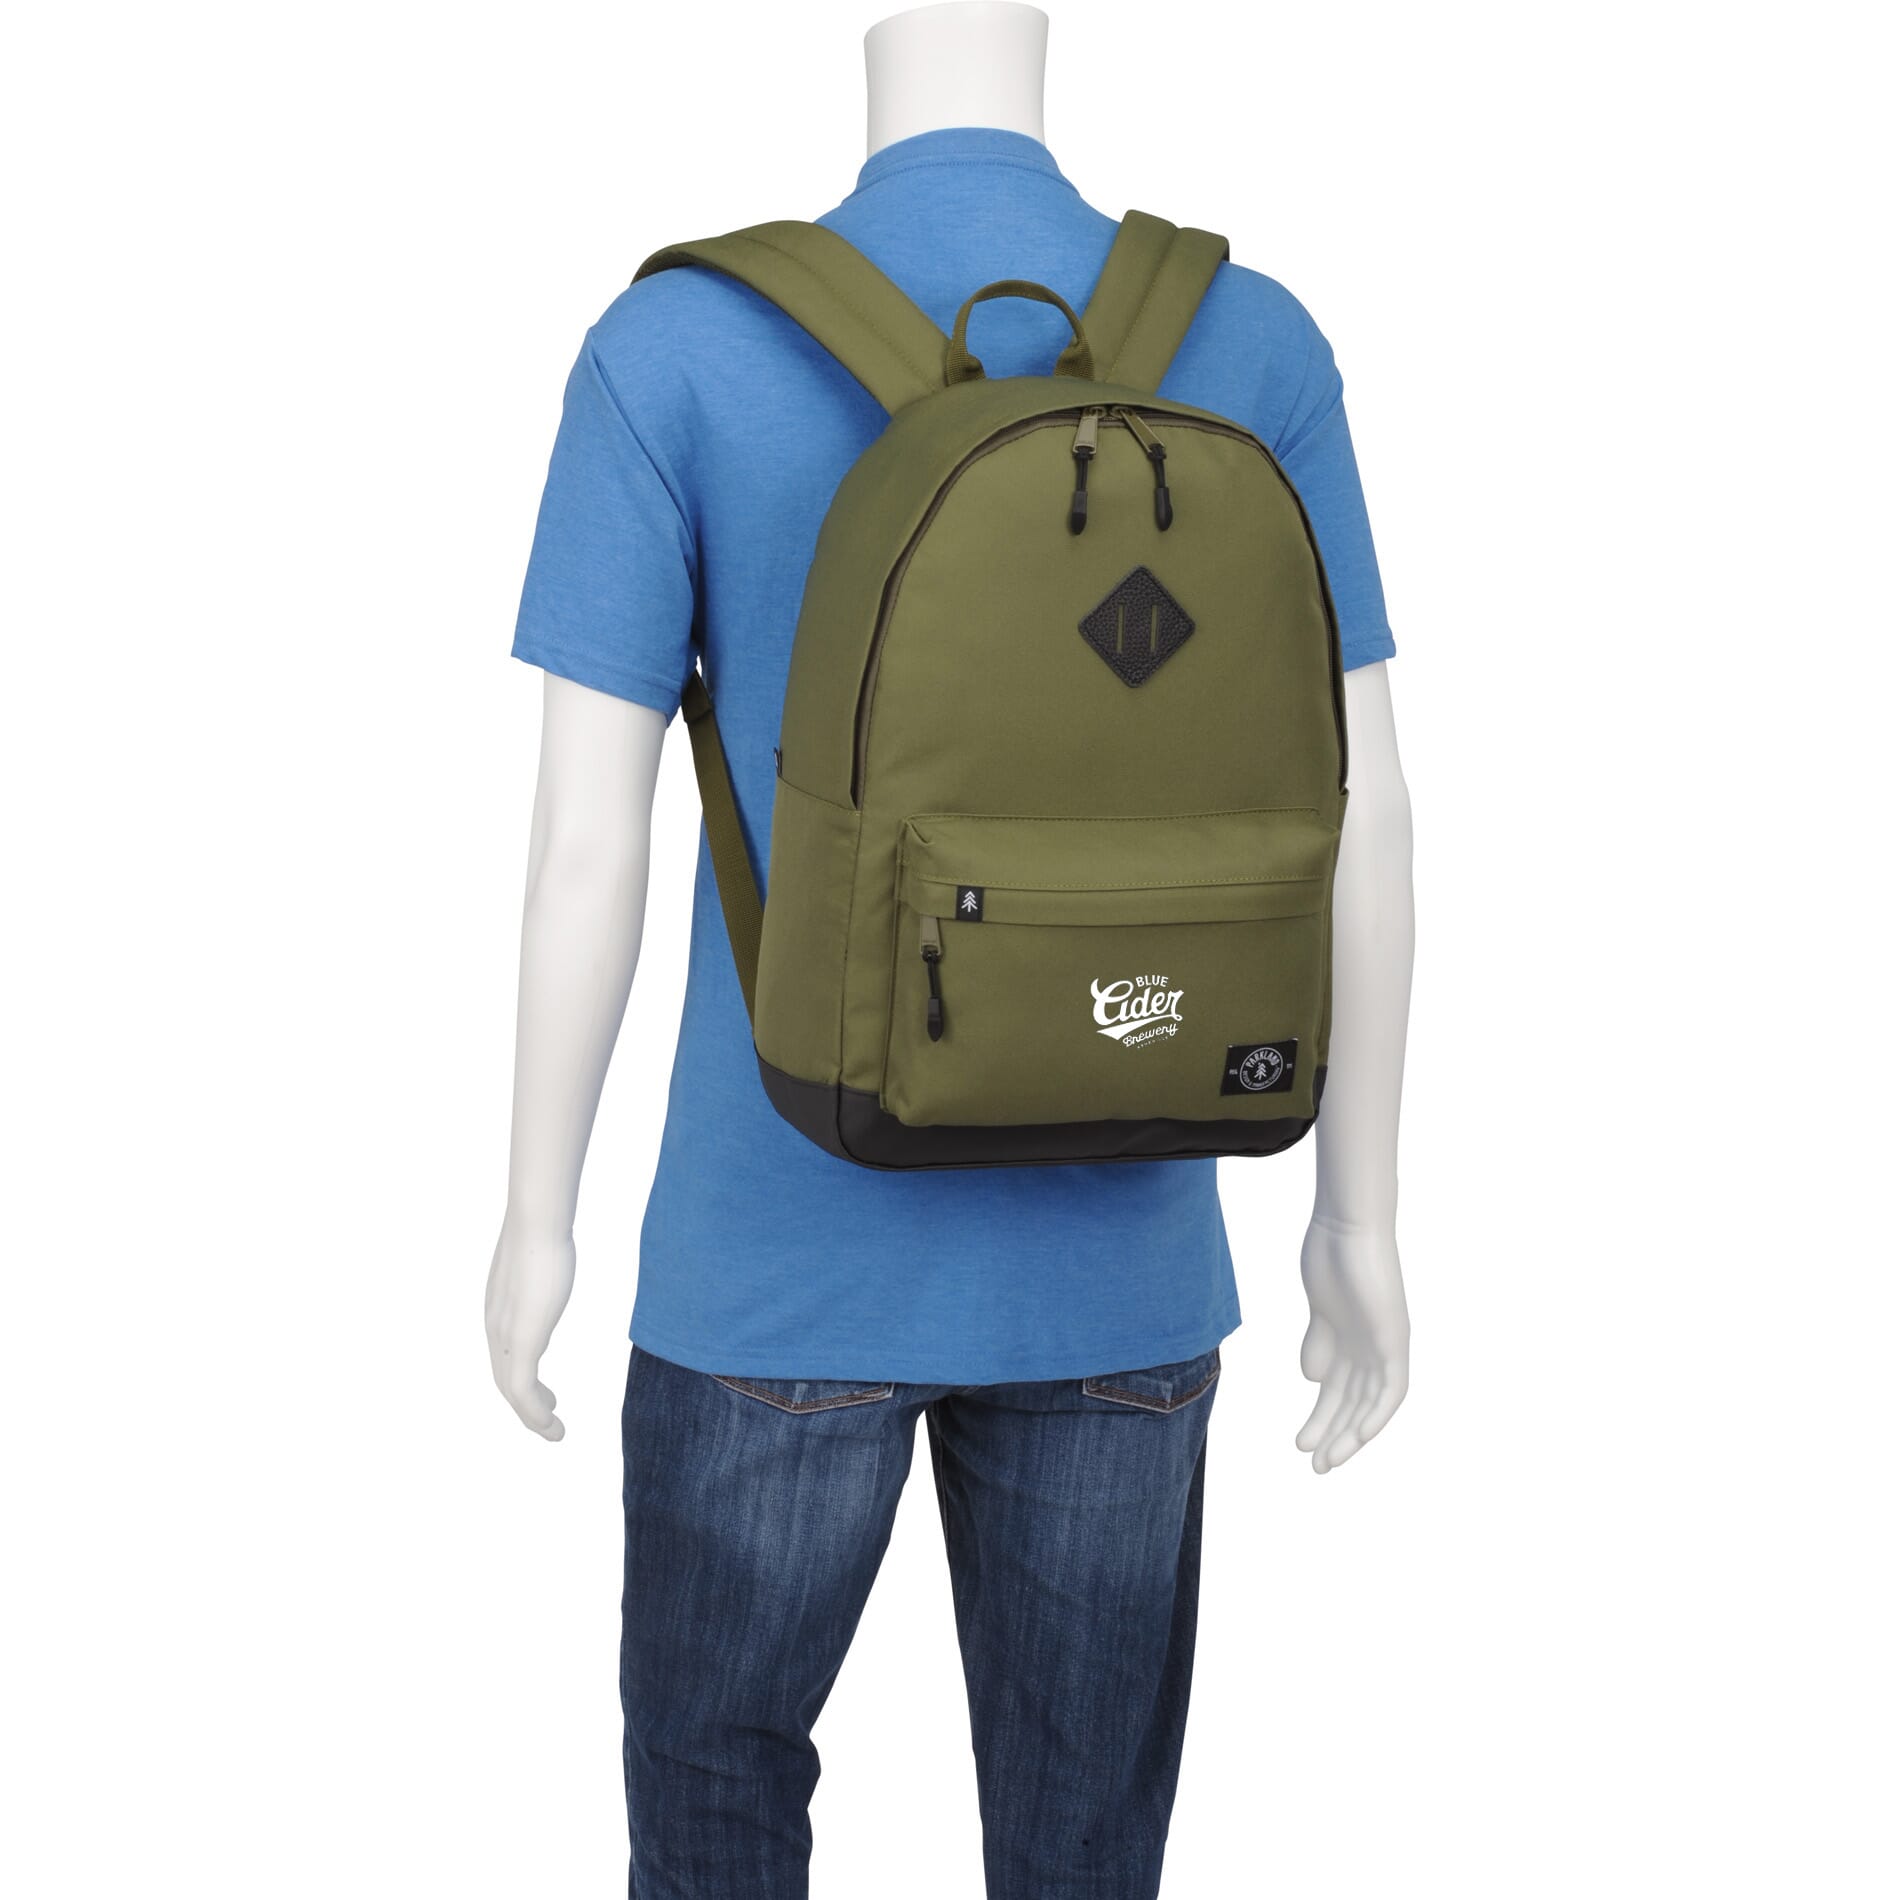 Promo Product Review: Parkland Kingston Plus 15 Computer Backpack